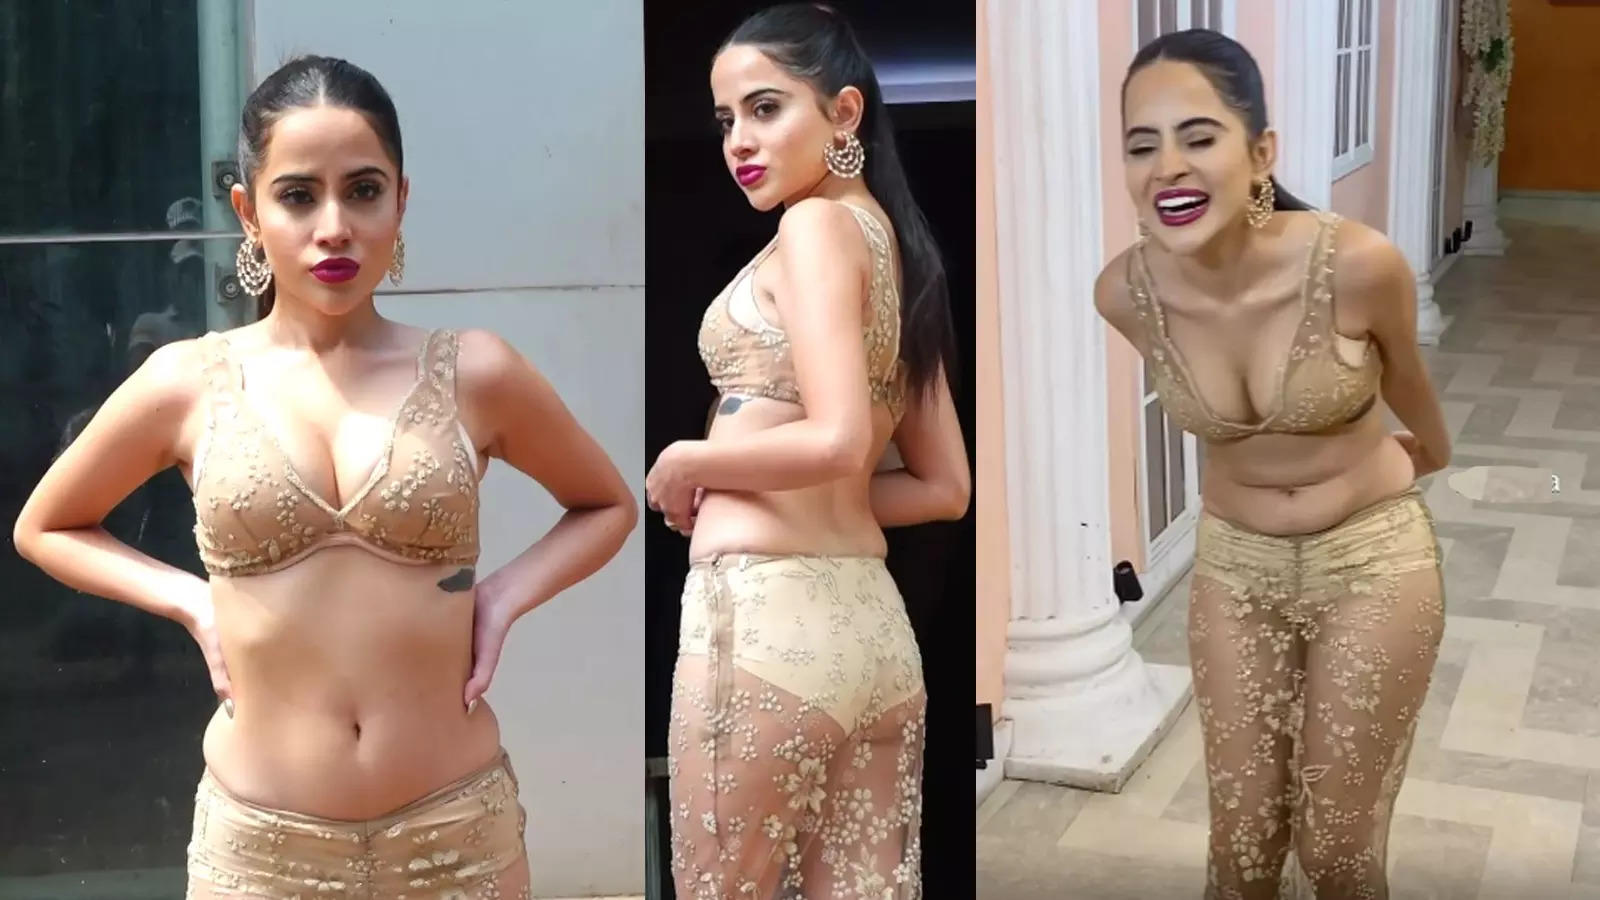 Urfi Javed Viral Video: 'Theek kapde pehno life main thoda kuch theek ho': Urfi Javed steps out in a golden net cloth skirt, gets brutally humiliated